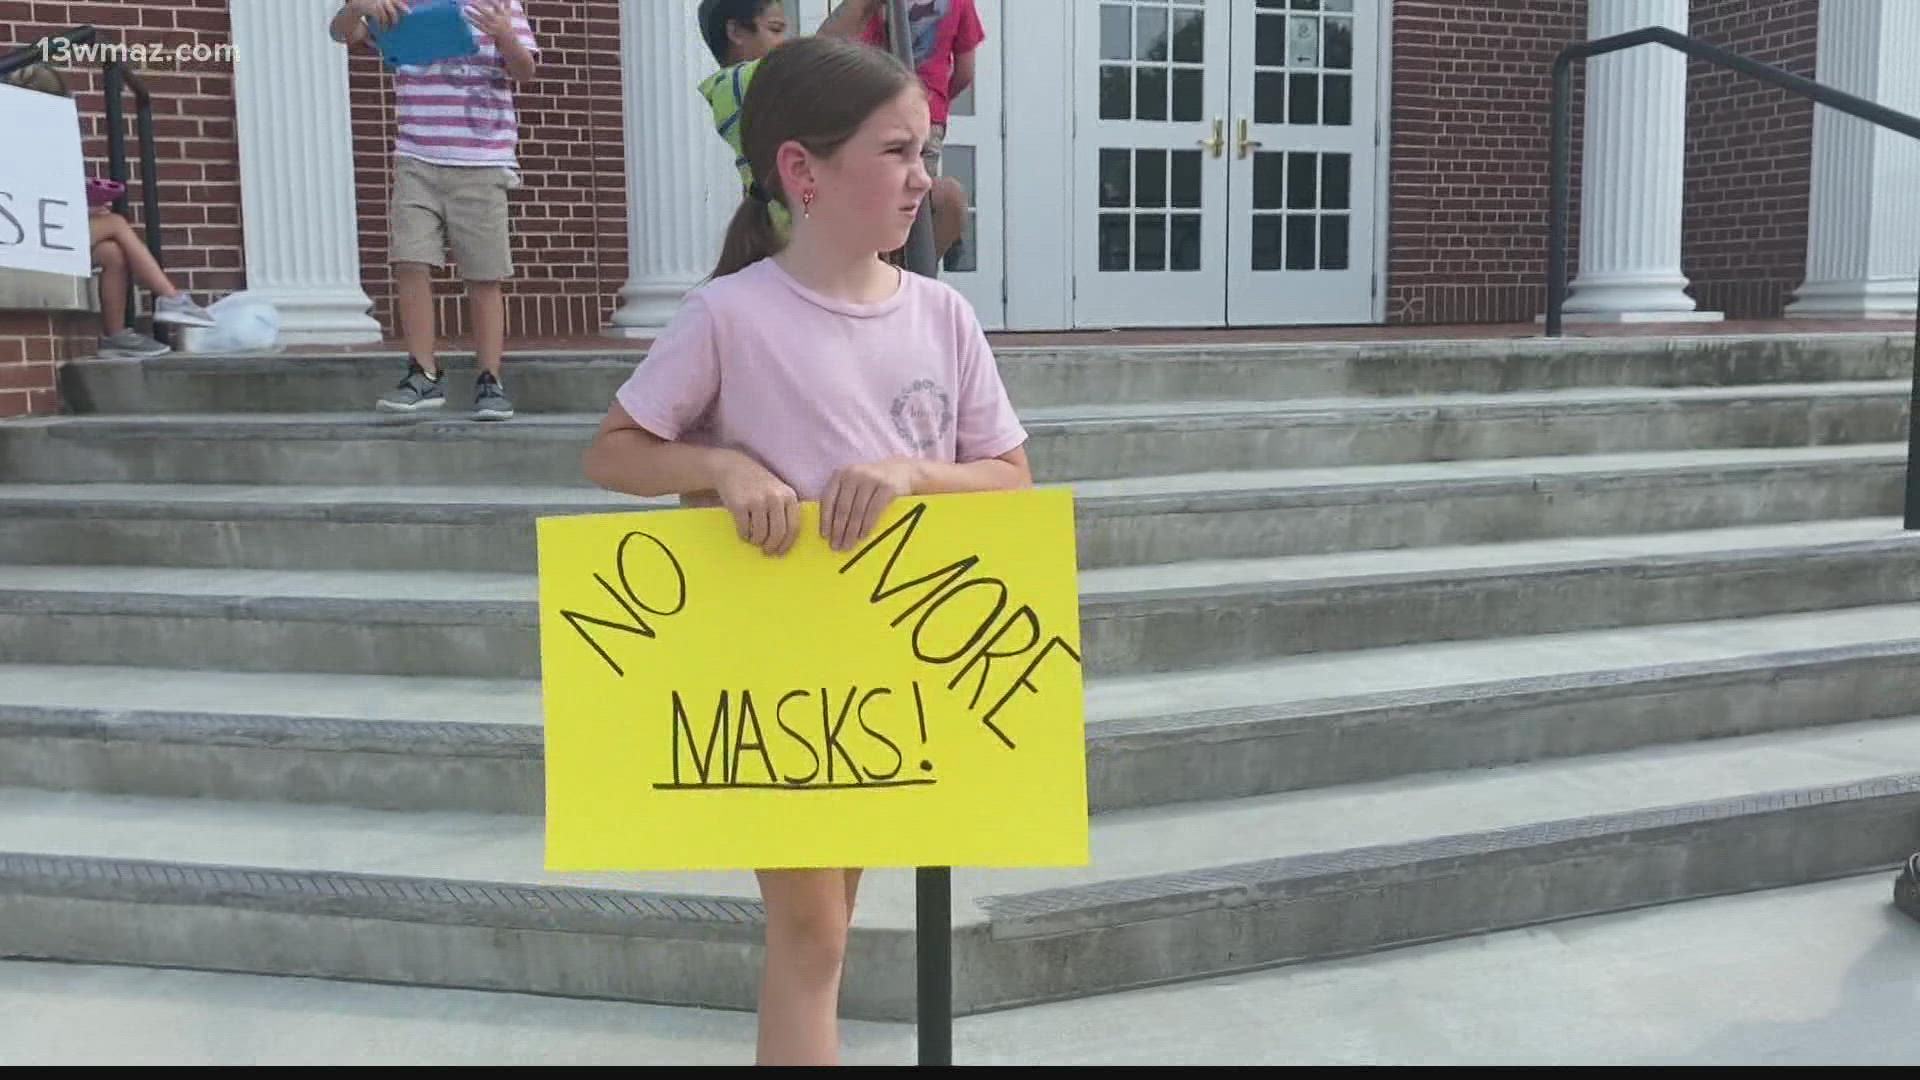 The Monroe County Board of Education voted 6 to 0 Wednesday to reject a mask mandate required earlier this week.